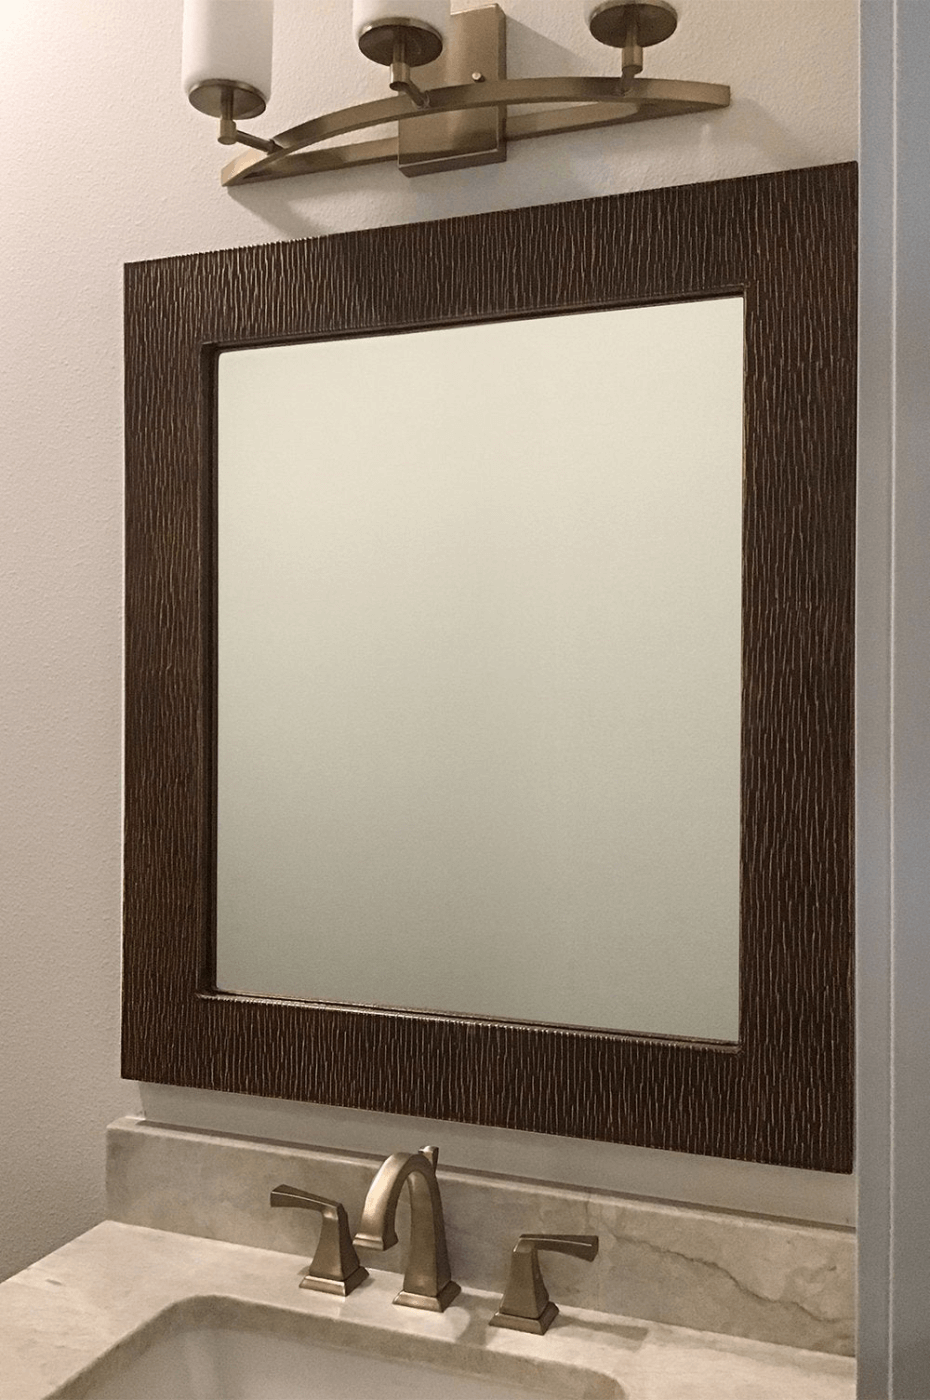 Premier Copper 36 in. Rectangle Hammered Copper Mirror - Lifestyle